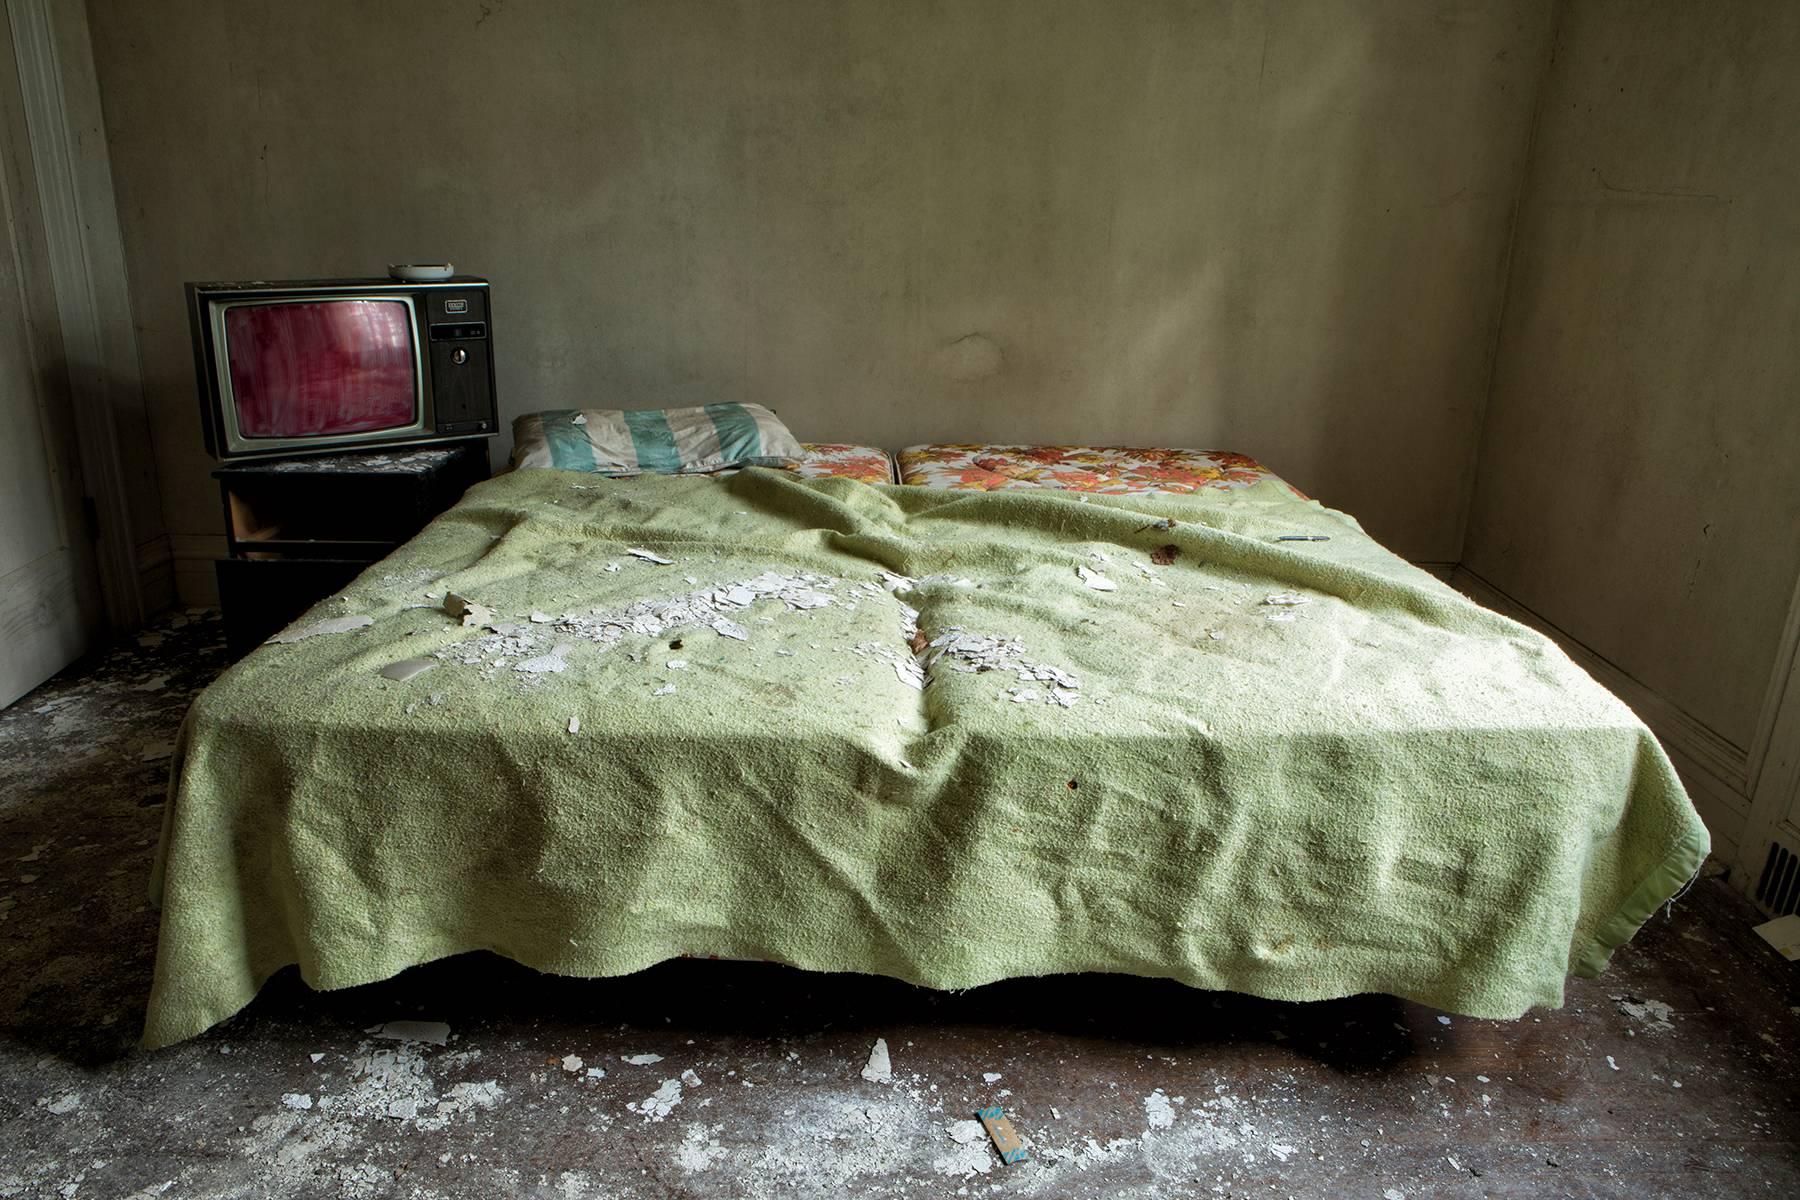 "Exhausted", abandoned, bed, television, metal print, green, color photograph - Photograph by Rebecca Skinner